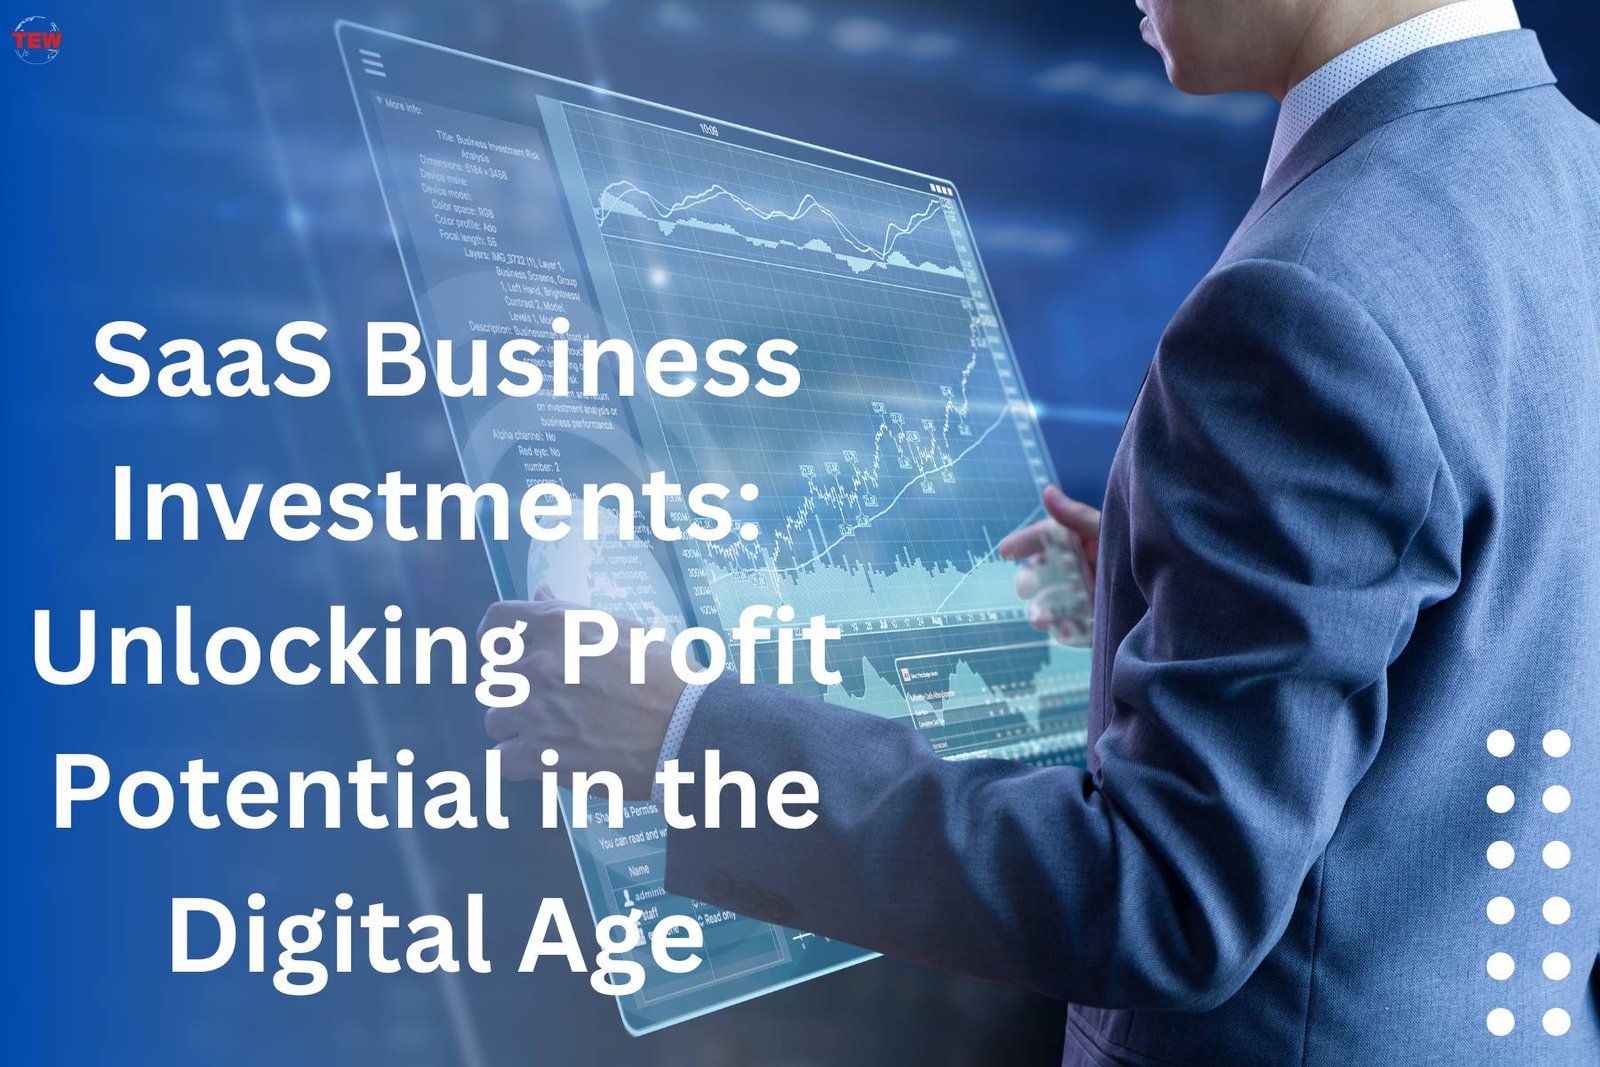 SaaS Business Investments: Unlocking Profit Potential in the Digital Age | The Enterprise World